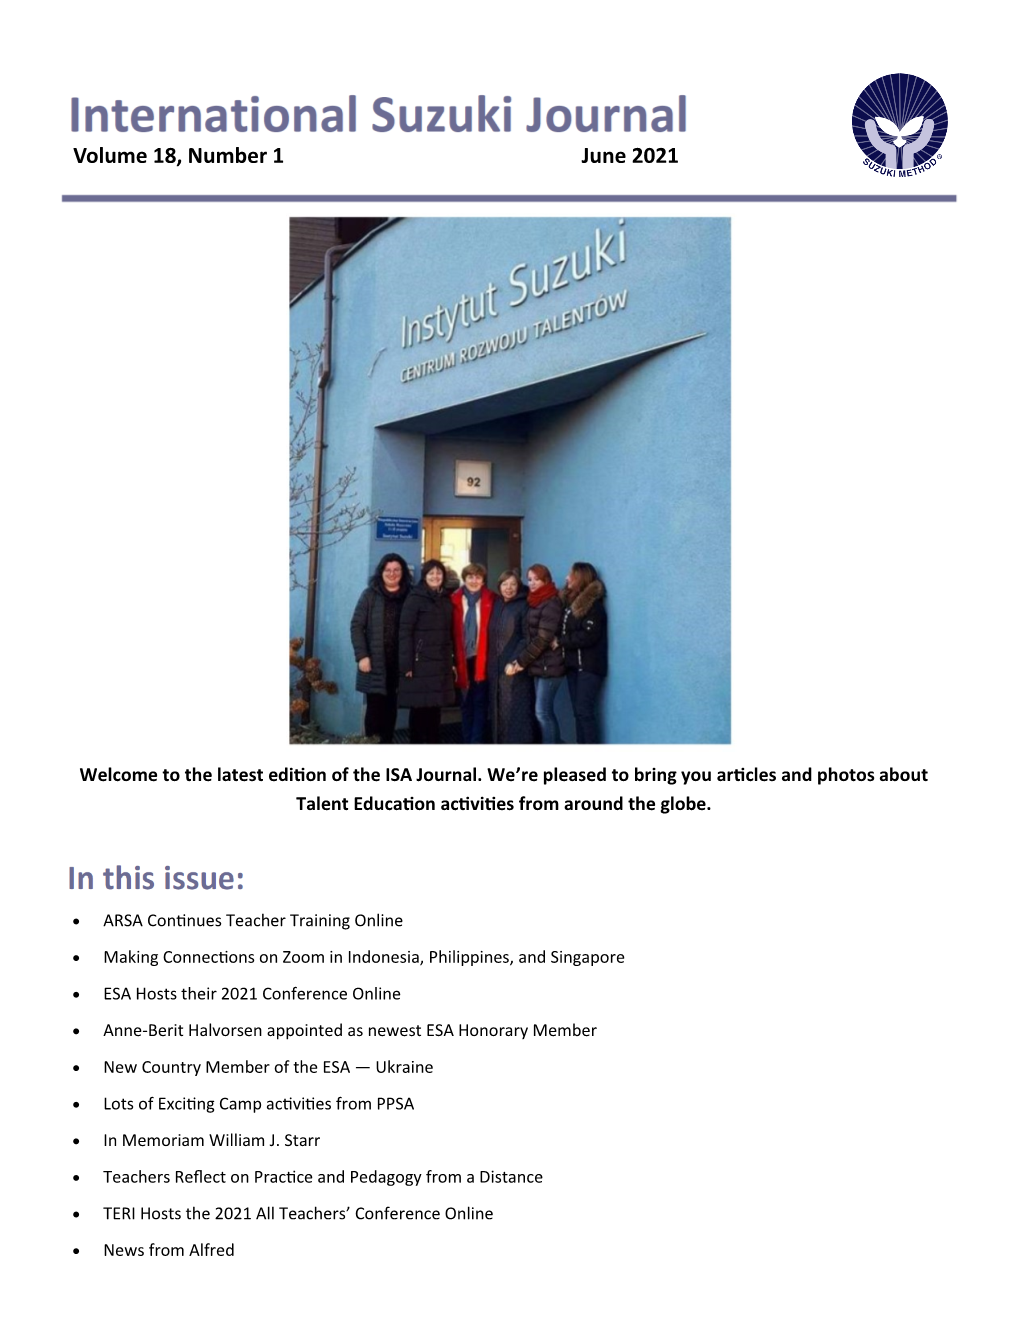 View the ISA Journal